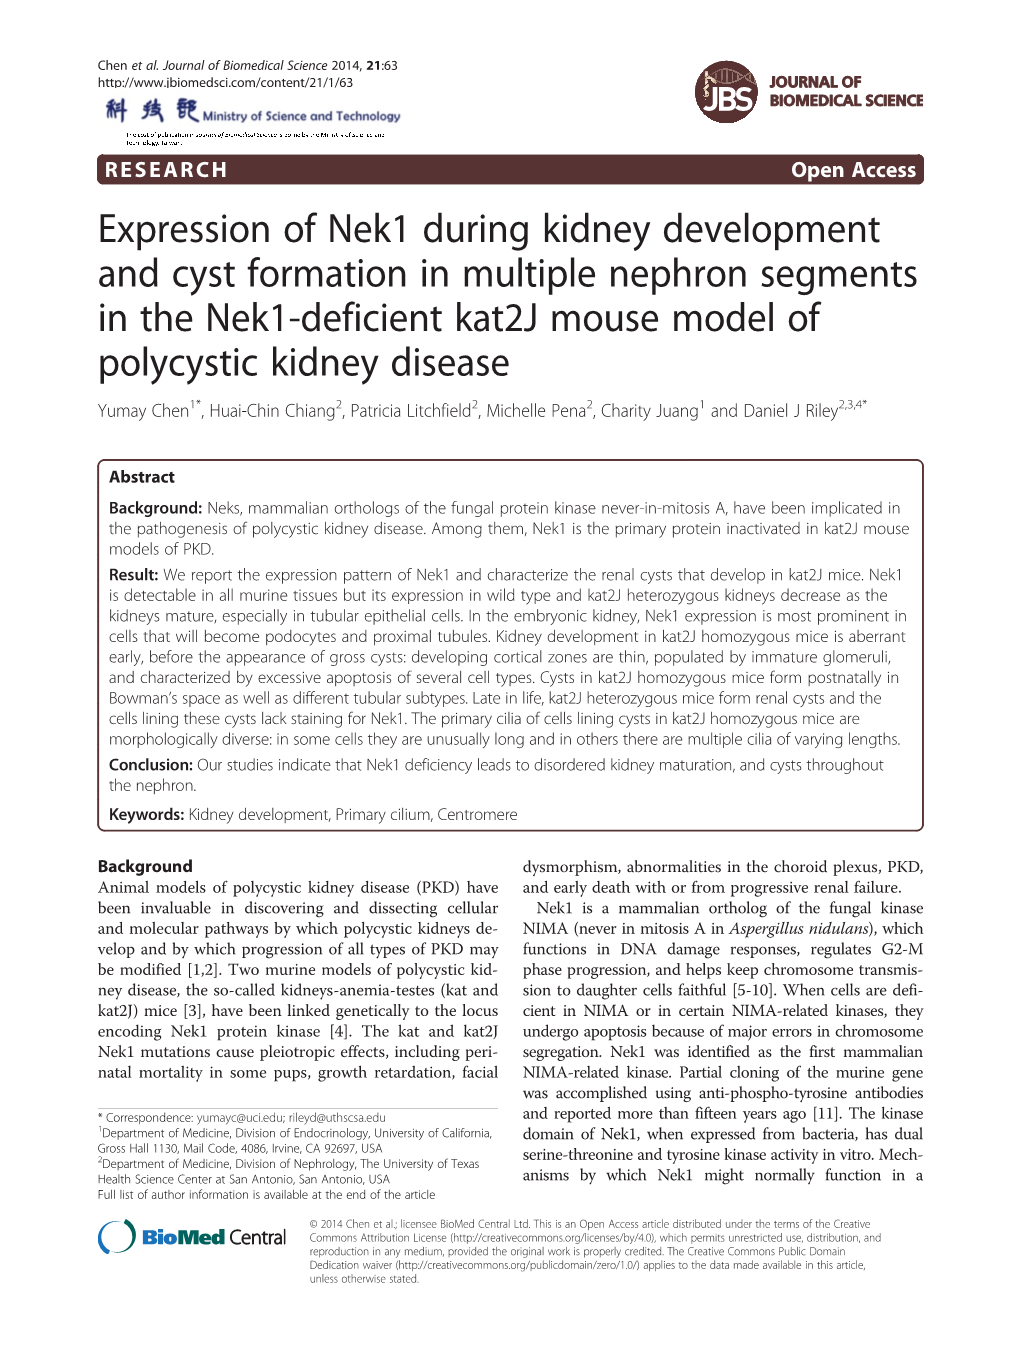 Expression of Nek1 During Kidney Development and Cyst Formation in Multiple Nephron